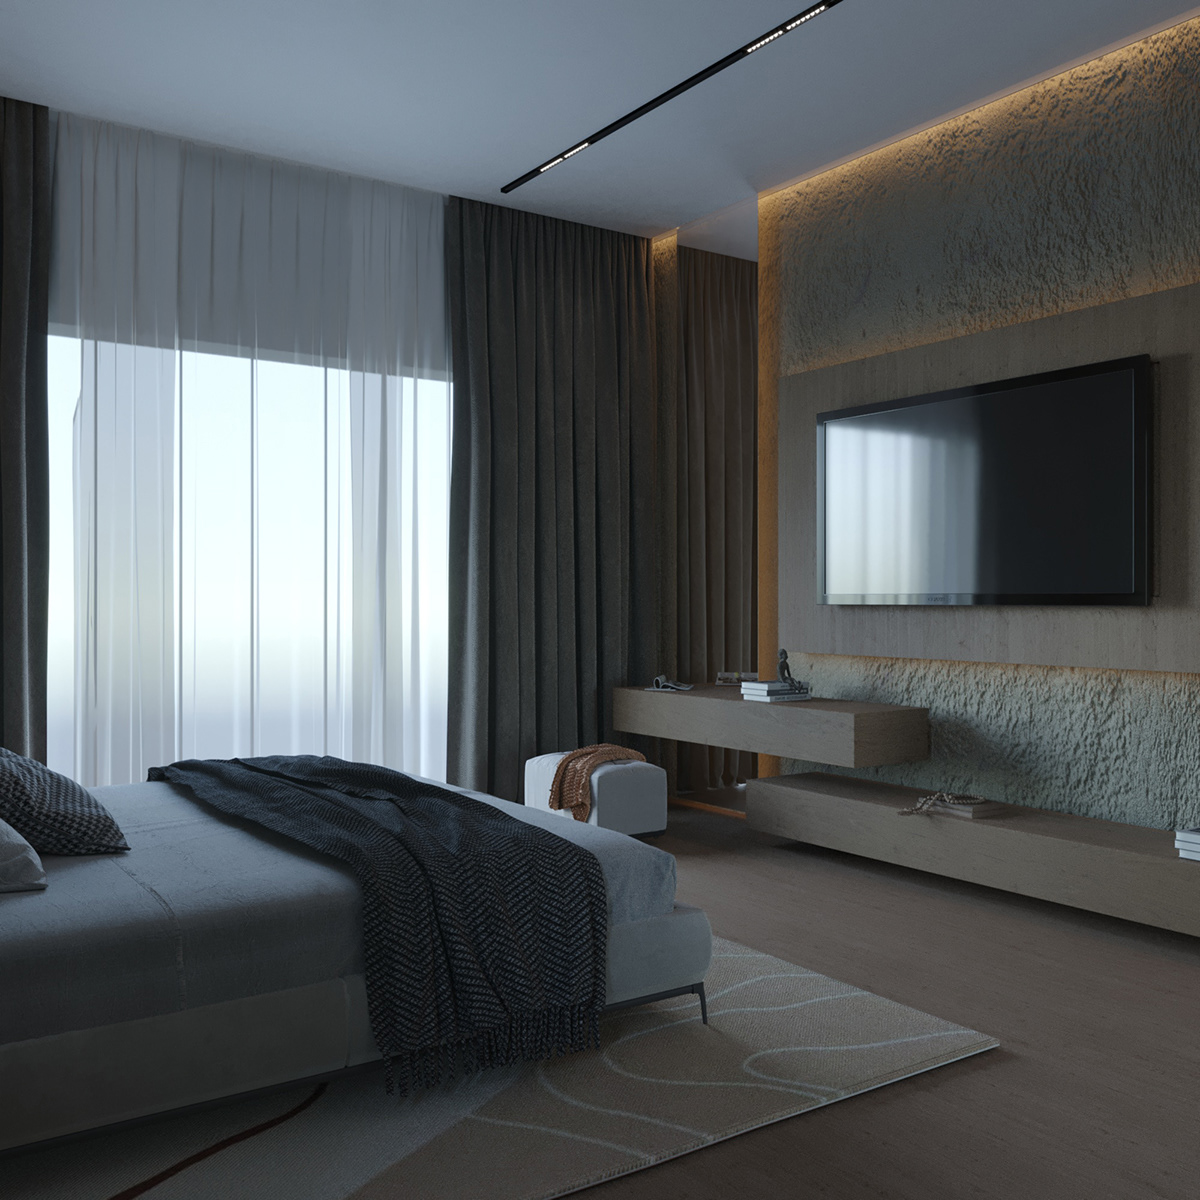 interior design  bedroom design Bedroom interior design architecture Interior modeling 3ds max 3Ddesing 3dmodelling  